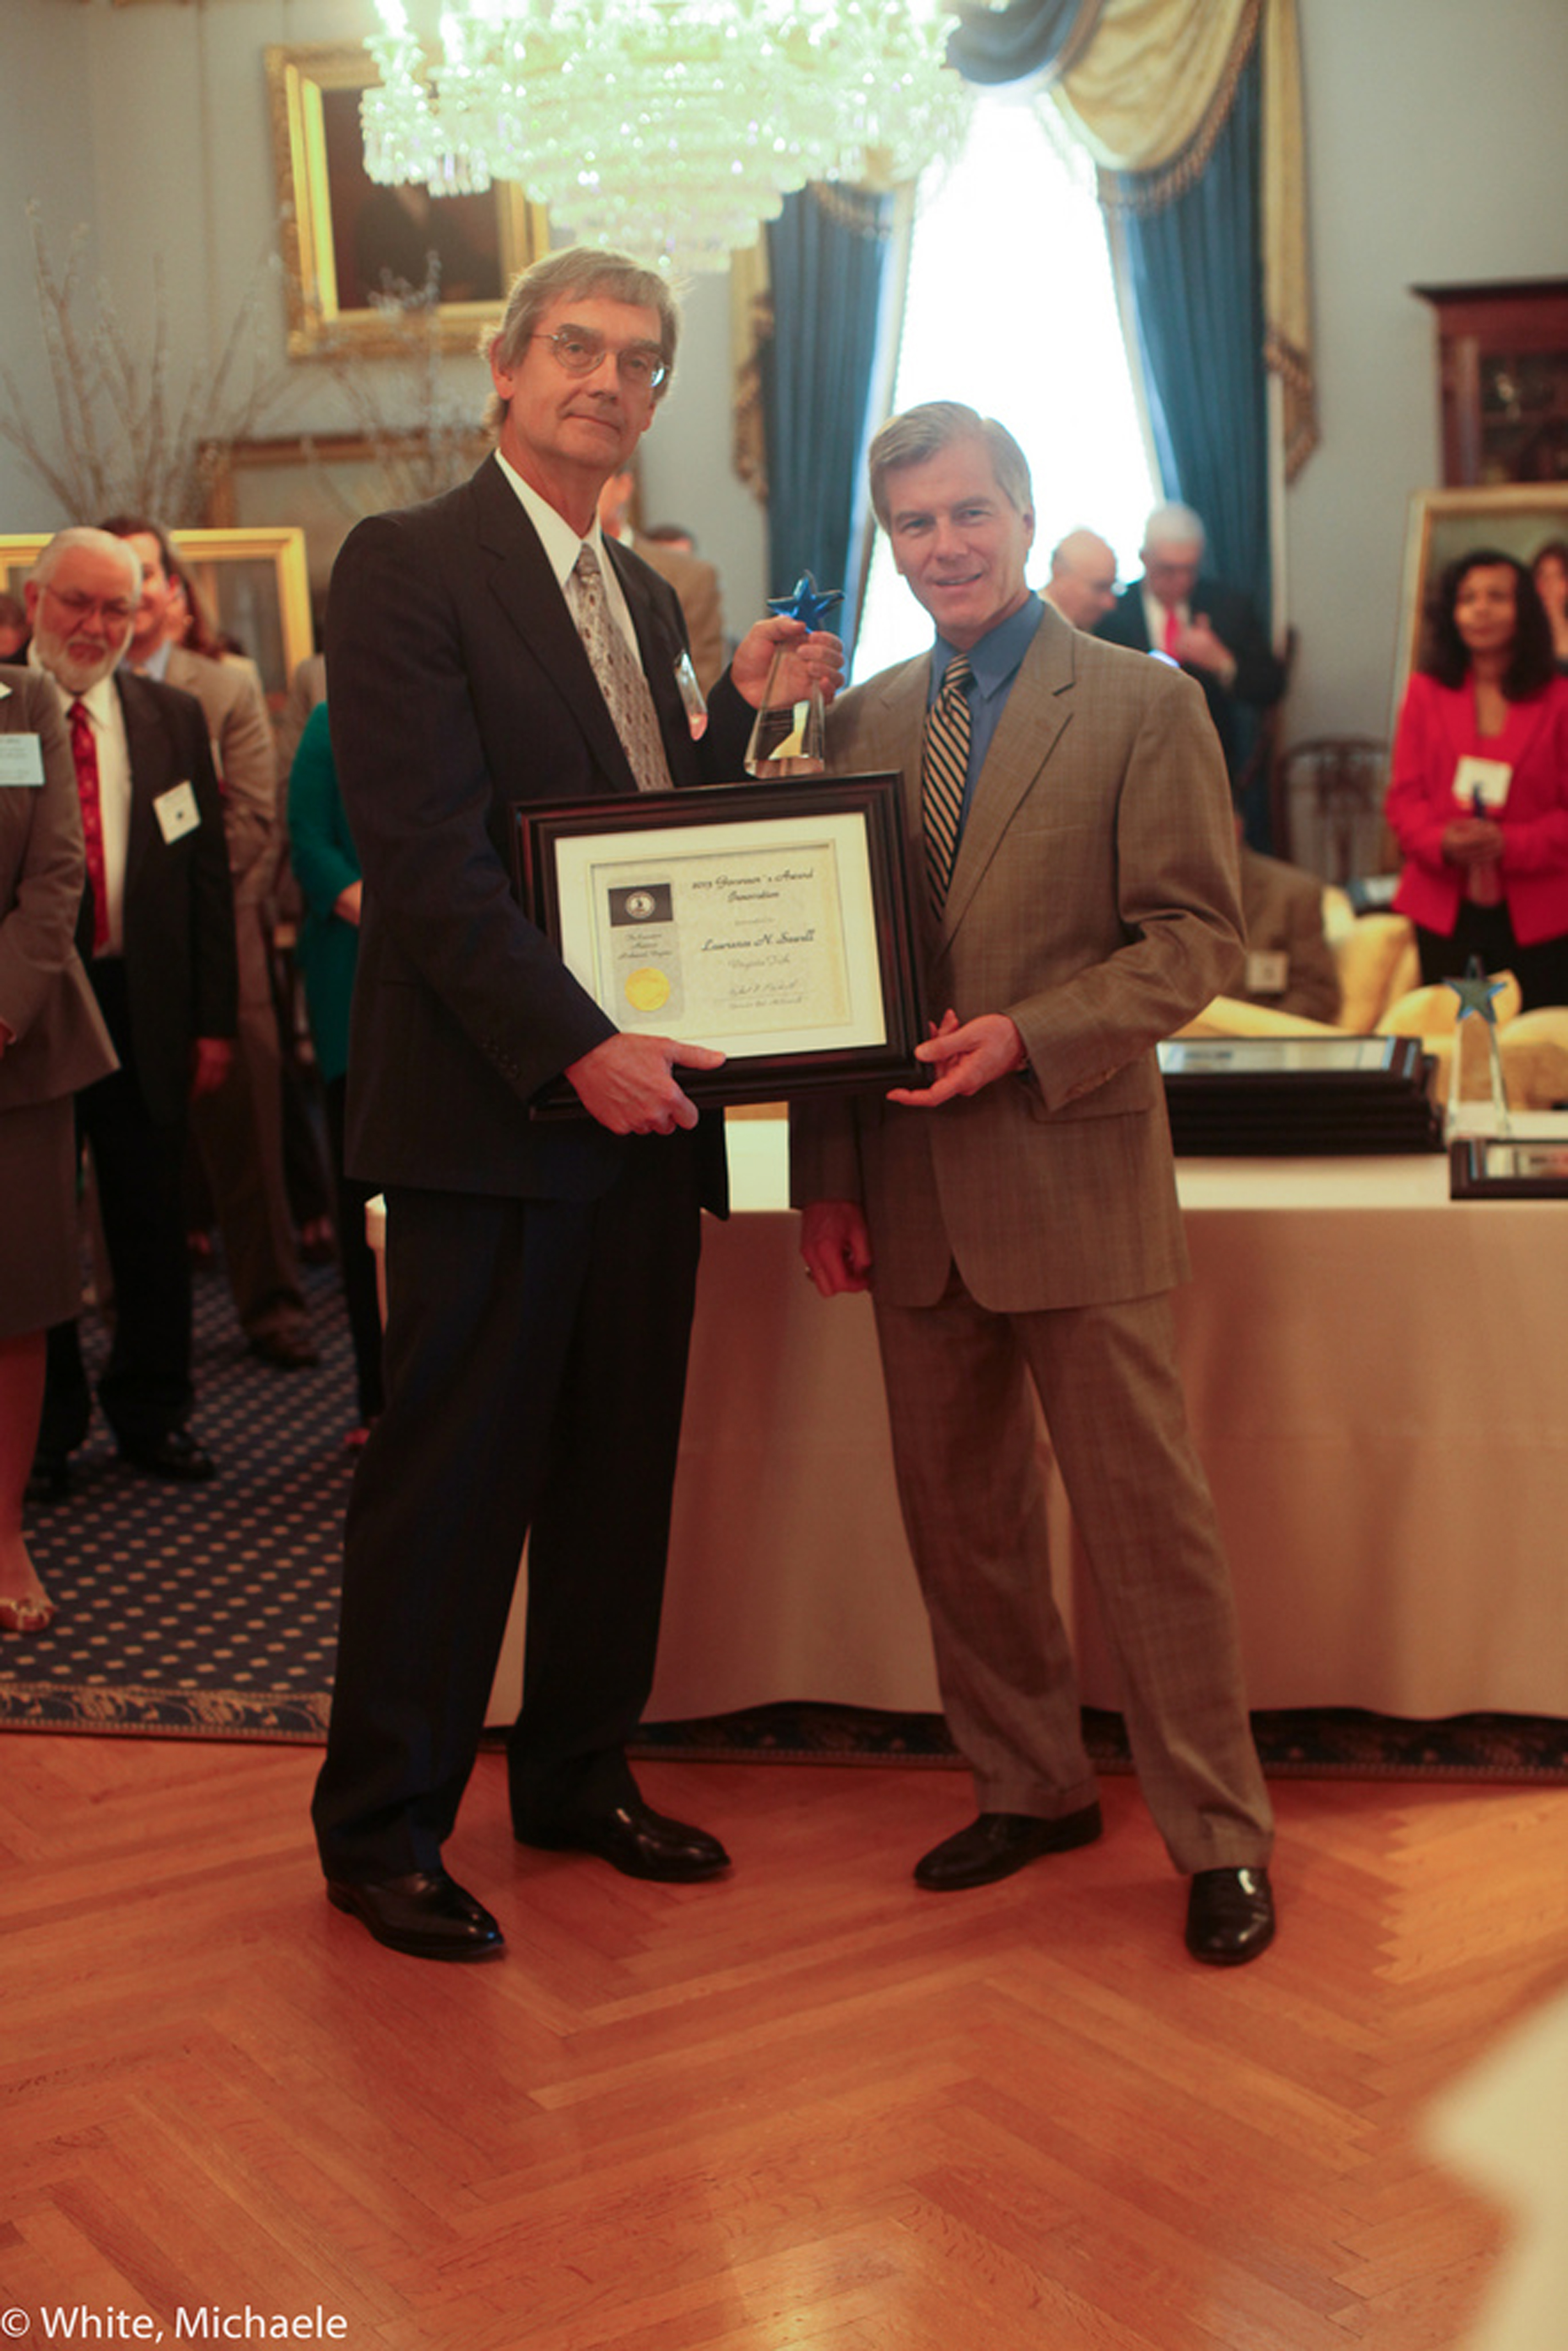 Gov. Bob McDonnell presented Lawrence Sewell with the Governor’s Award for Innovation during a ceremony at the Executive Mansion in Richmond, Va., on June 28.